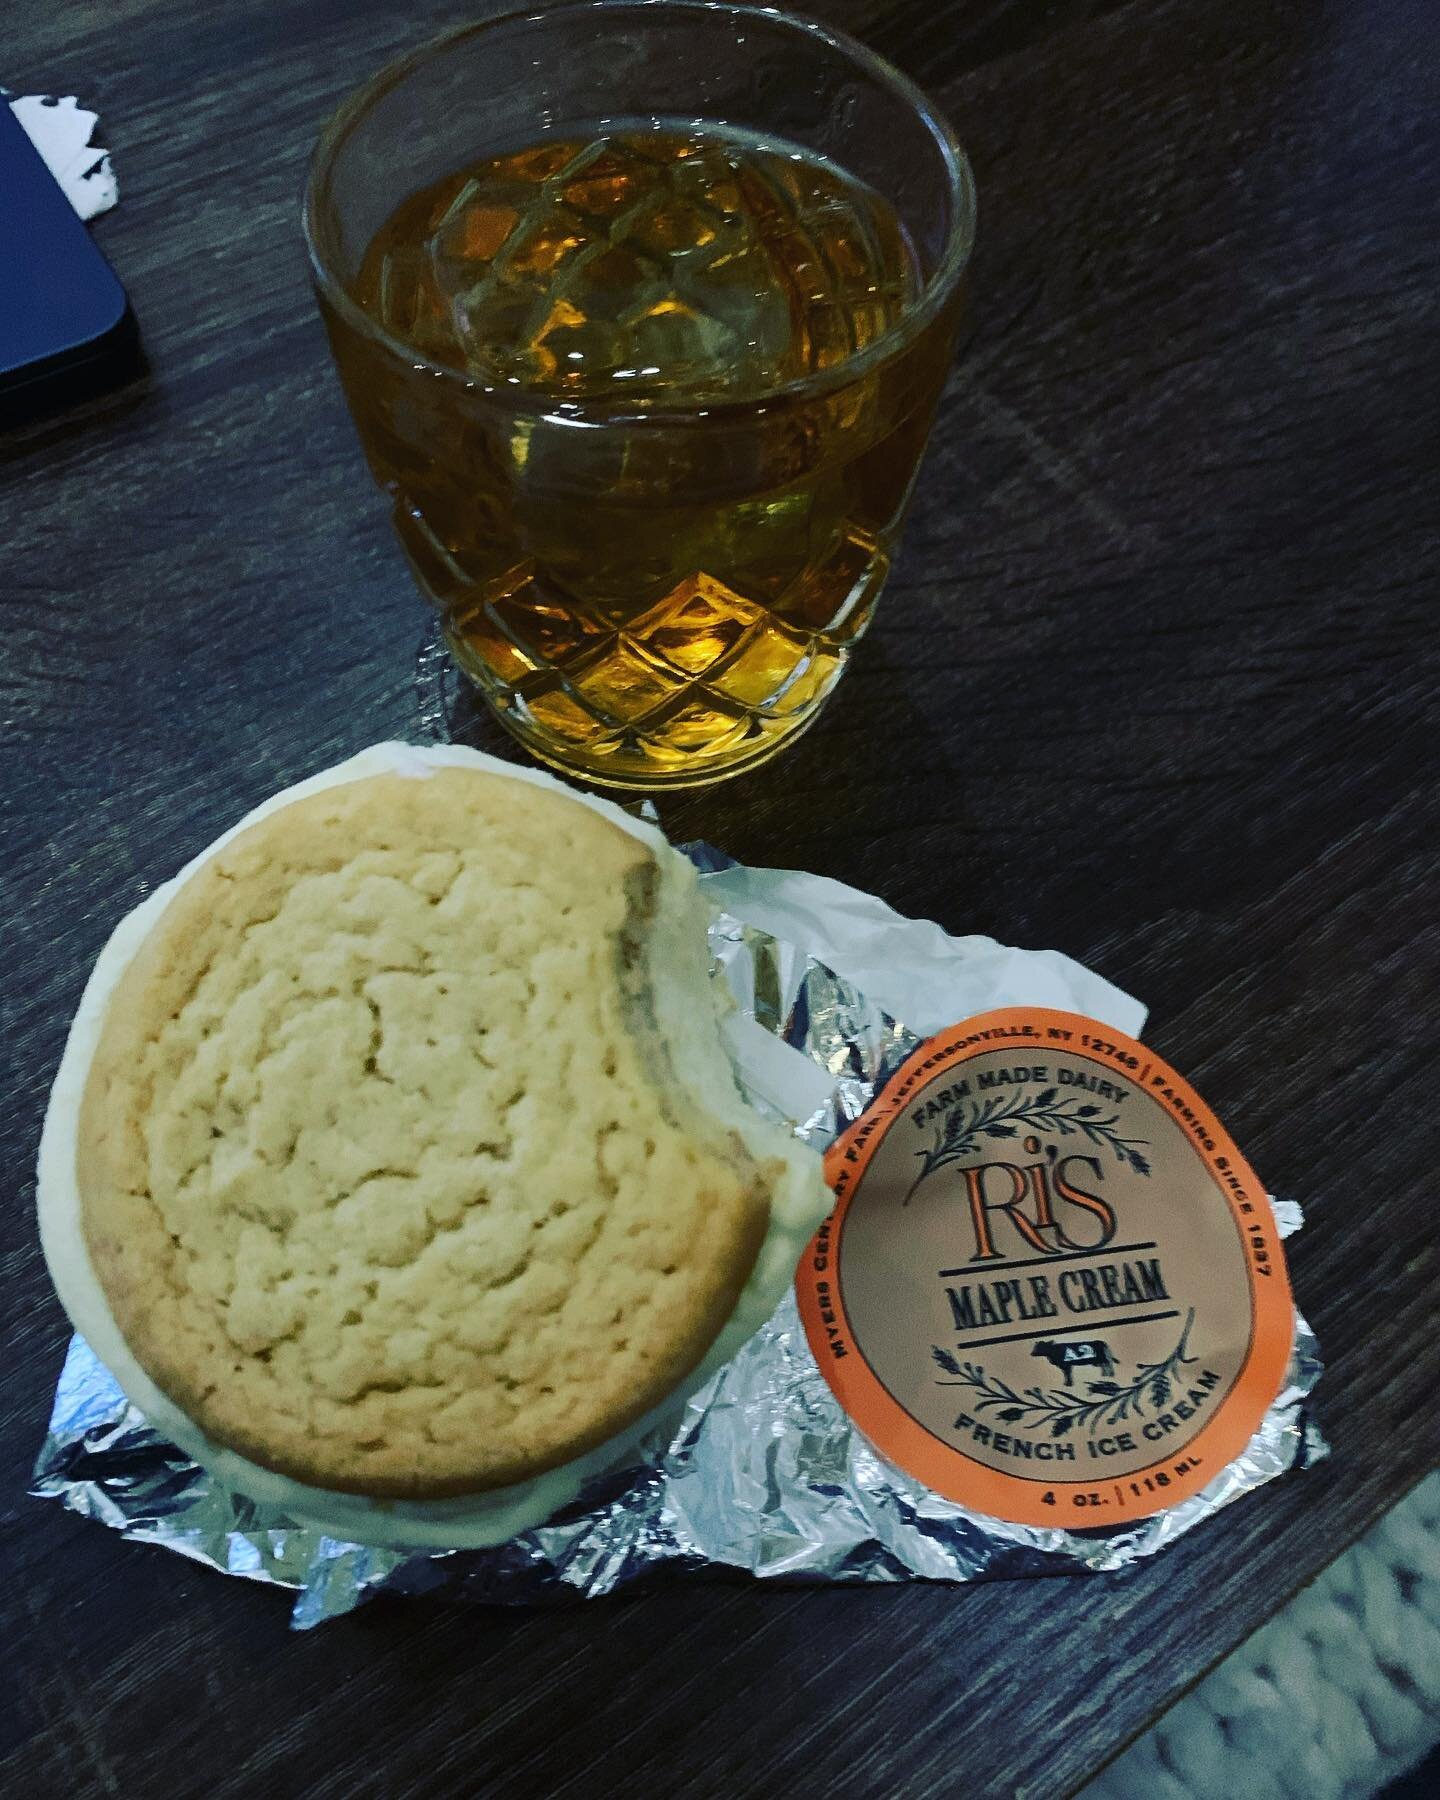 Let&rsquo;s talk dessert pairings. Hows about some Deadwood Rye with a Myer&rsquo;s Century Farm Sugar Cookie and Maple Ice Cream Samich?!
&hellip;#comegetsome 
.
.
.
.
#dessert #icecreamsandwich #bourbon #deadwoodwhiskey